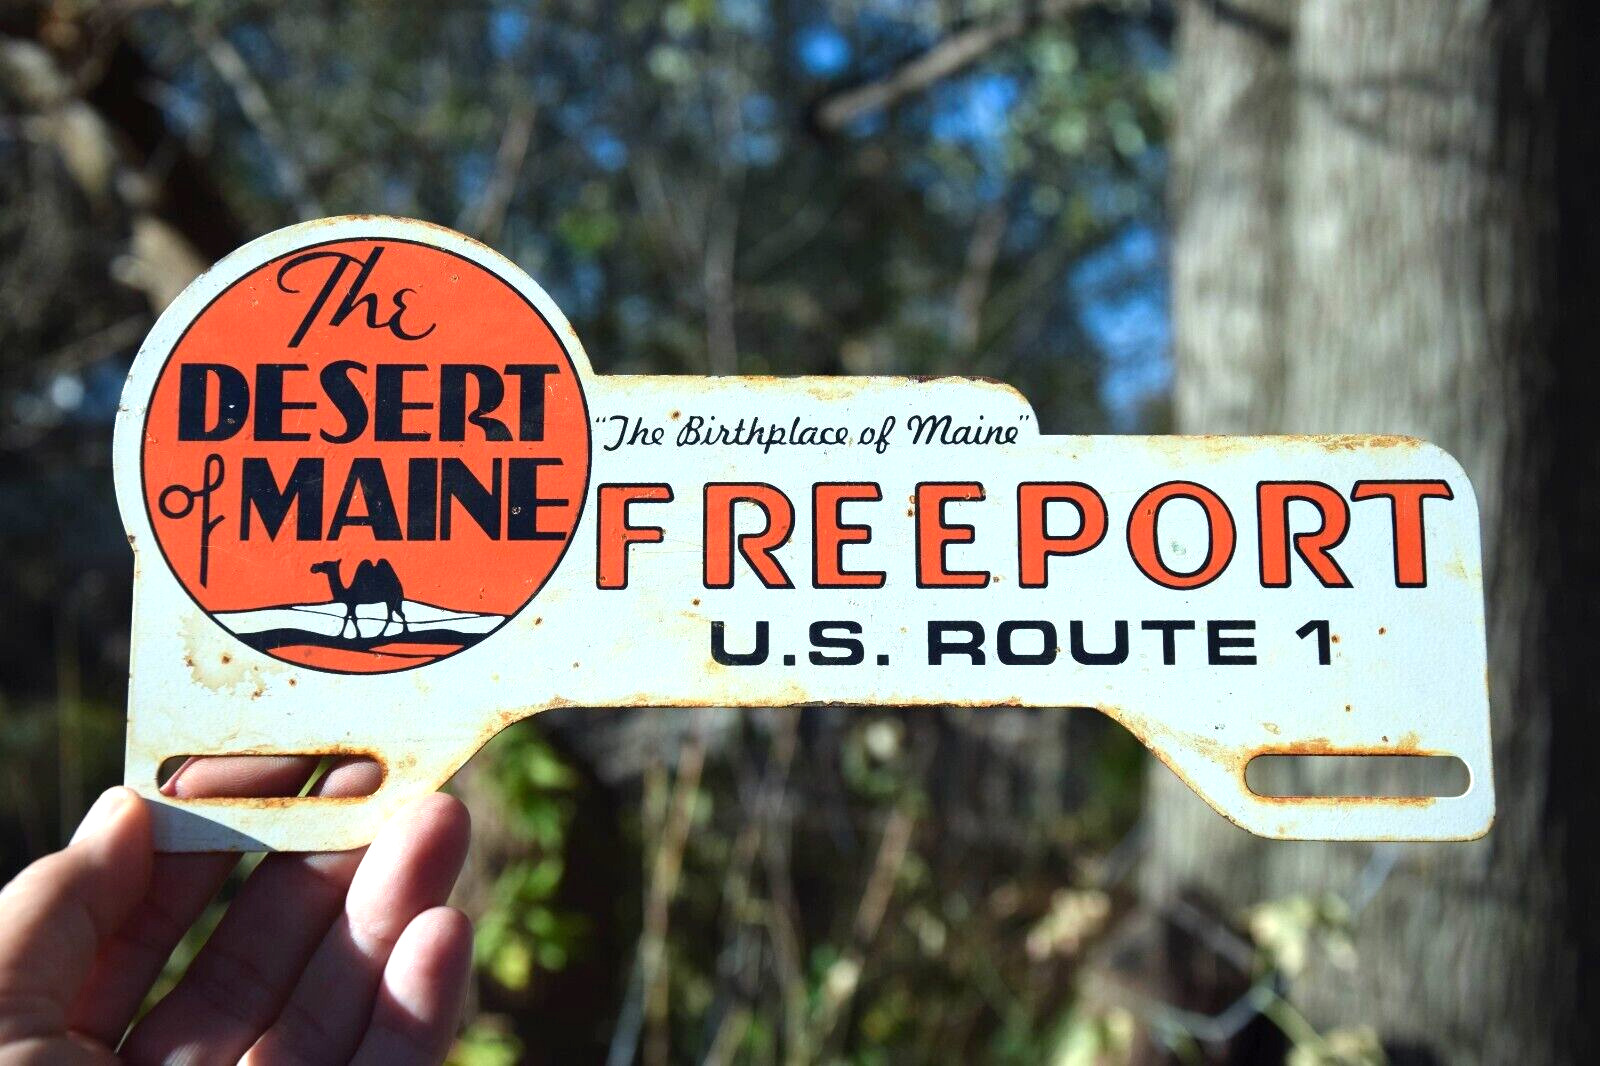 RARE 1950s DESERT MAINE FREEPORT US ROUTE 1 PAINTED METAL TOPPER SIGN CAMEL R121